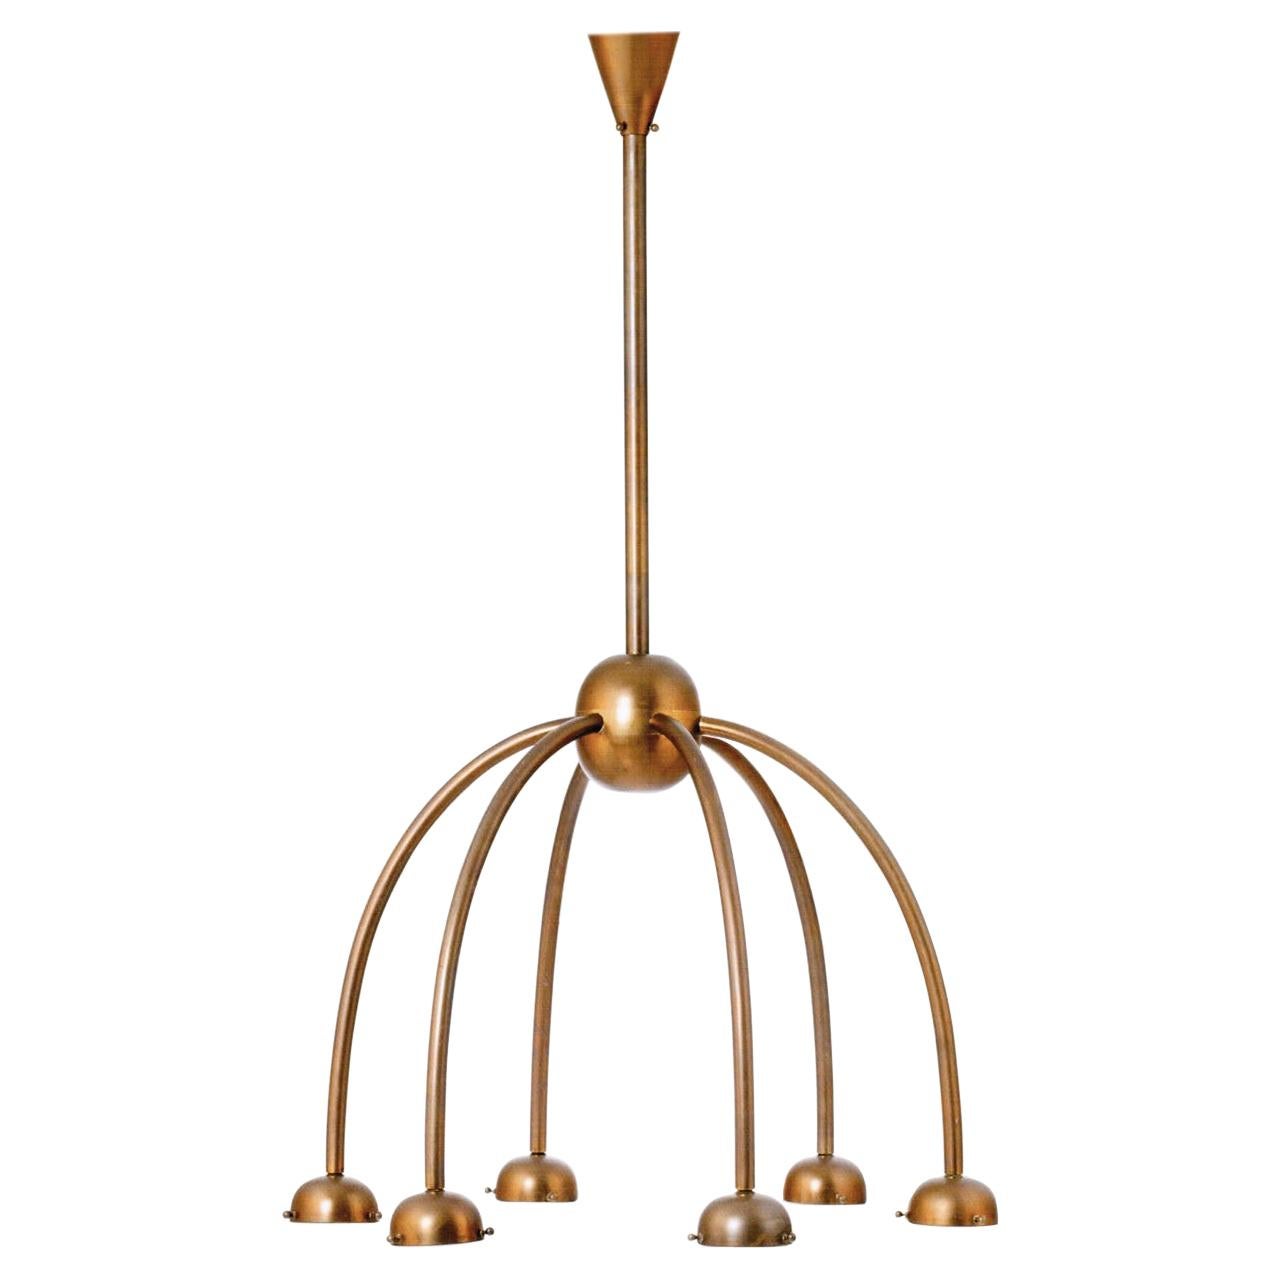 A very modern chandelier, which also can be made in other sizes. Available in different sizes. 
Originally manufactured at the Wiener Werkstaette Atelier, now custom made production at the Woka Lamps Workshop in Vienna.
Used for the Woolworth